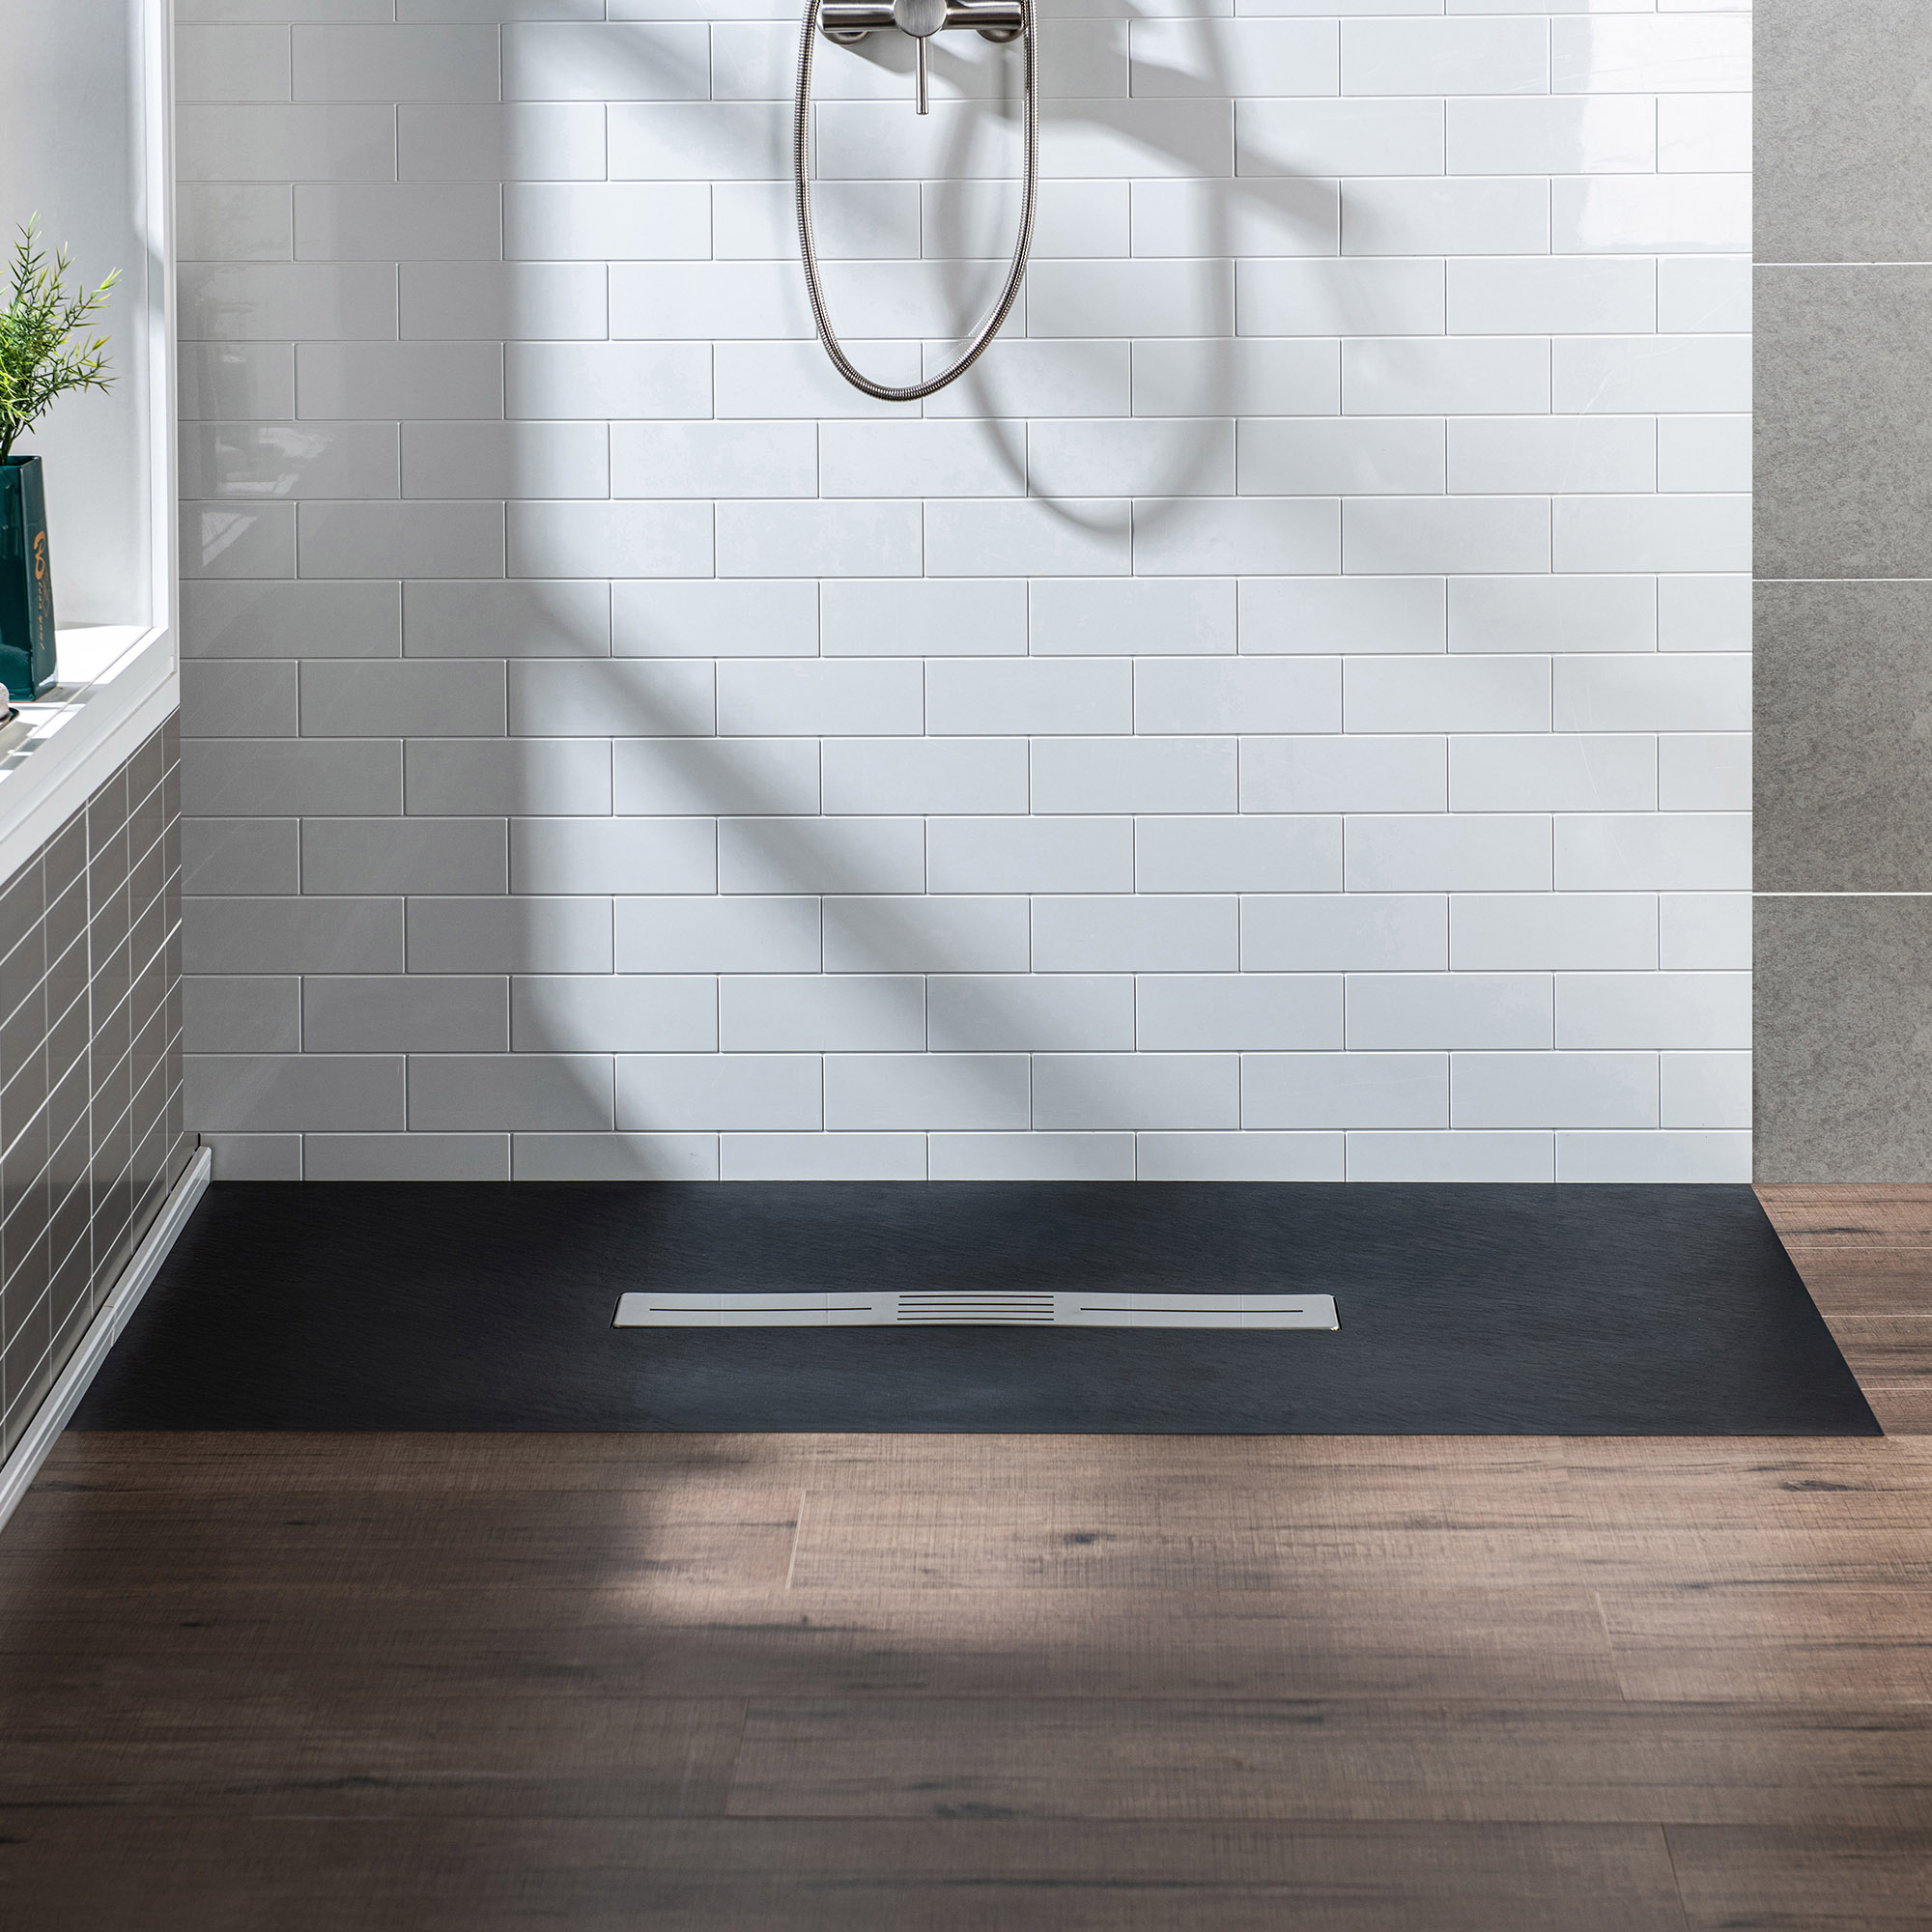  WOODBRIDGE 60-in L x 36-in W Zero Threshold End Drain Shower Base with Center Drain Placement, Matching Decorative Drain Plate and Tile Flange, Wheel Chair Access, Low Profile, Black_12574